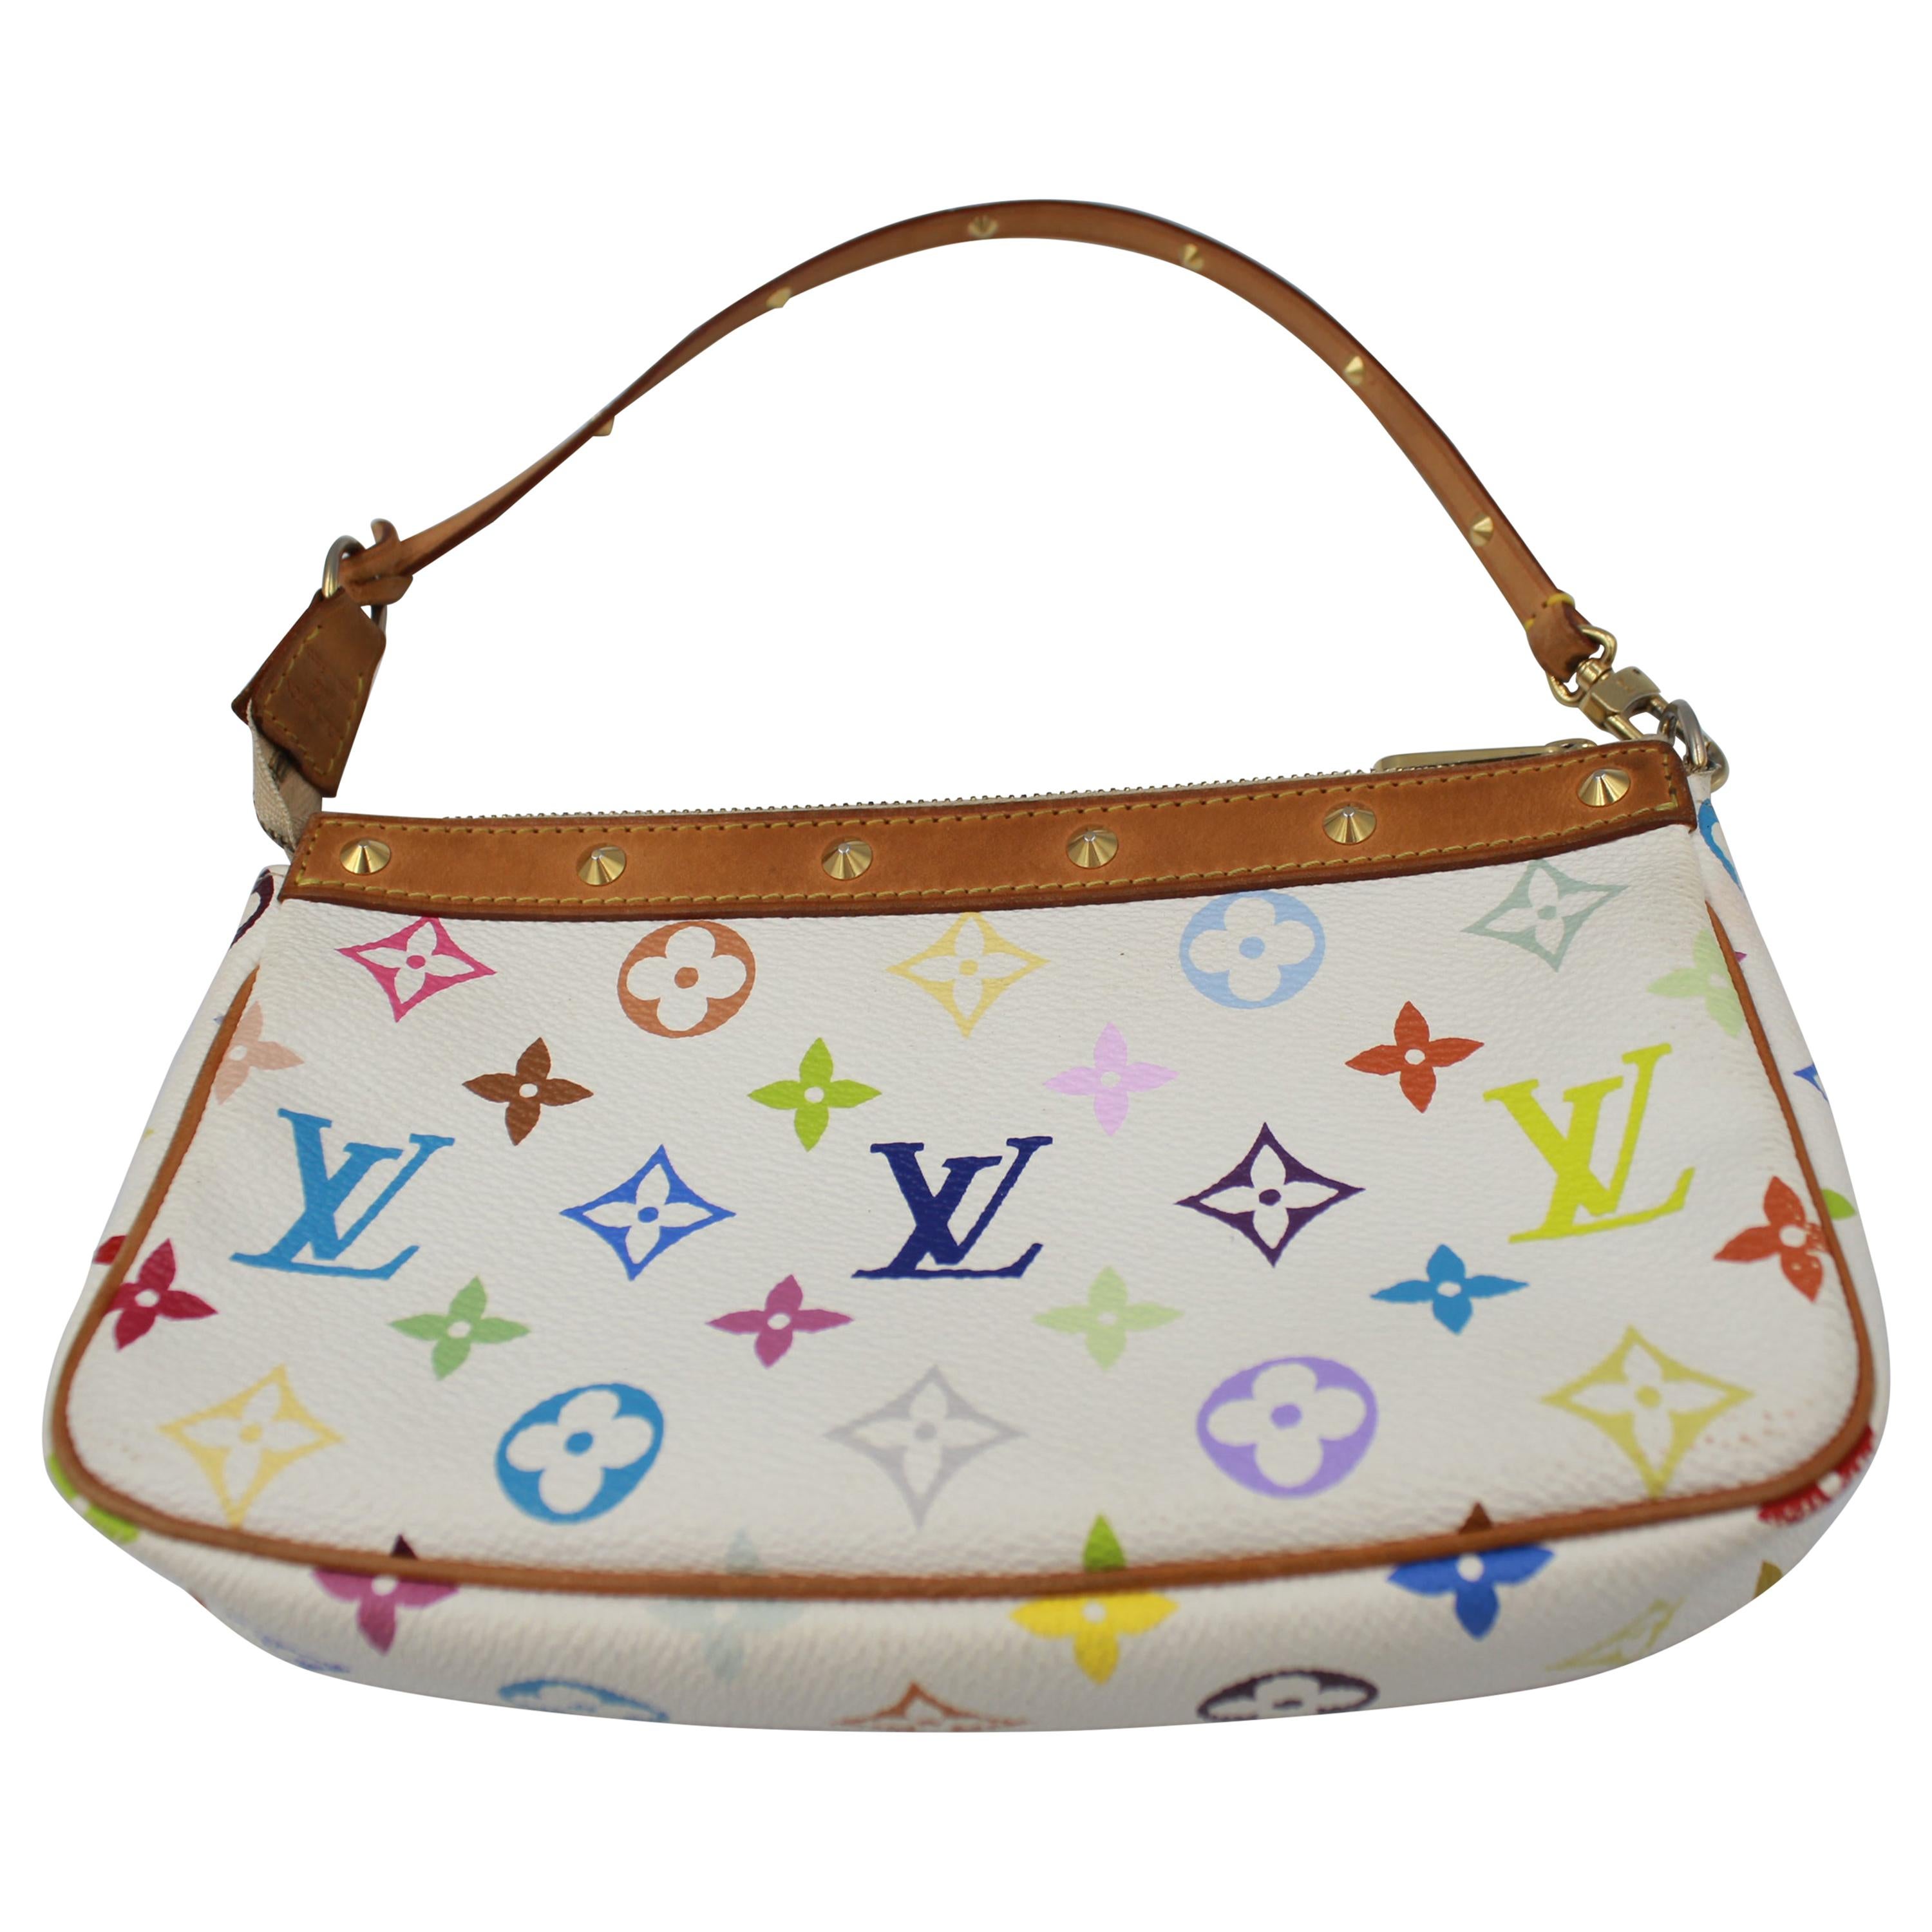 Lous Vuitton accessoire clutch in multicolours monogram by Takashi Murakami.   For Sale